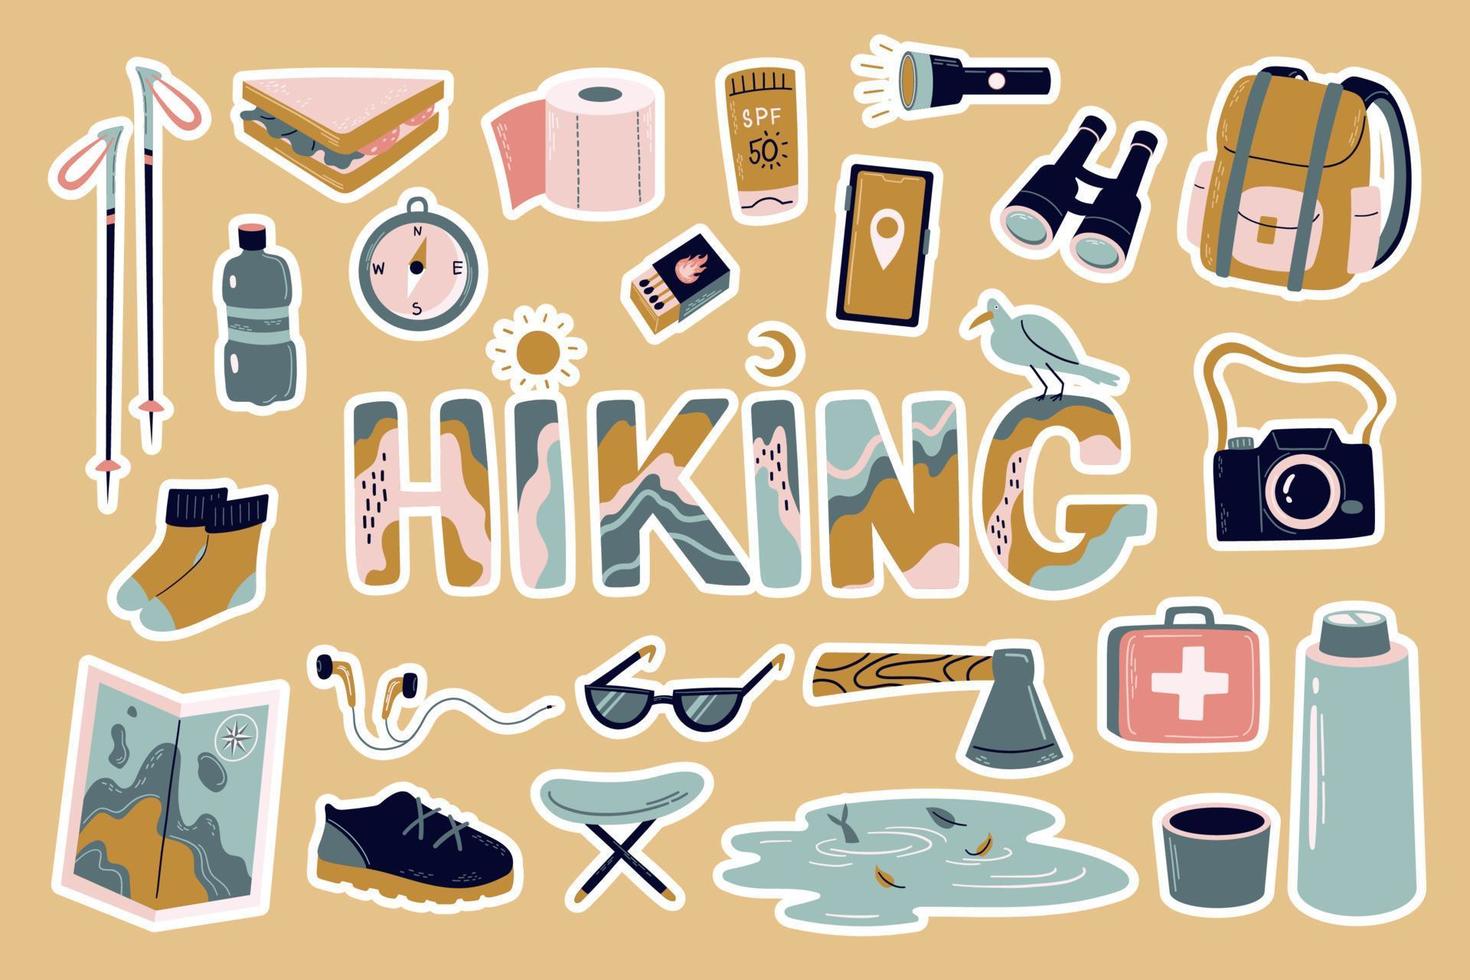 Sticker pack Bundle hiking camping, trekking and backpacking. Collection of items for tourism or travel backpack, map, boots, trekking sticks, thermos, toilet paper, binoculars etc. vector